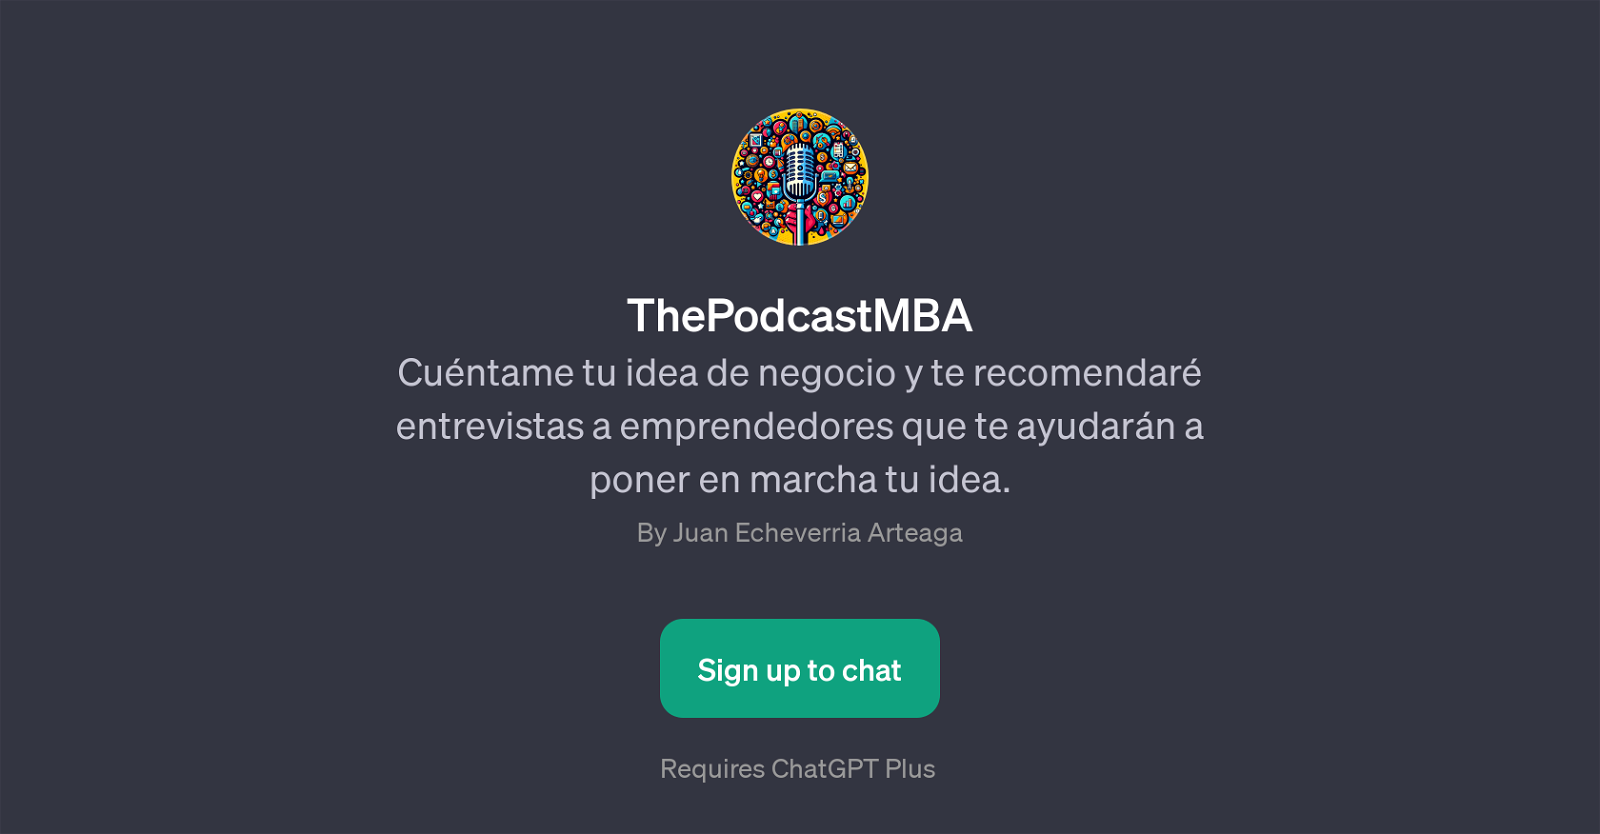 ThePodcastMBA website